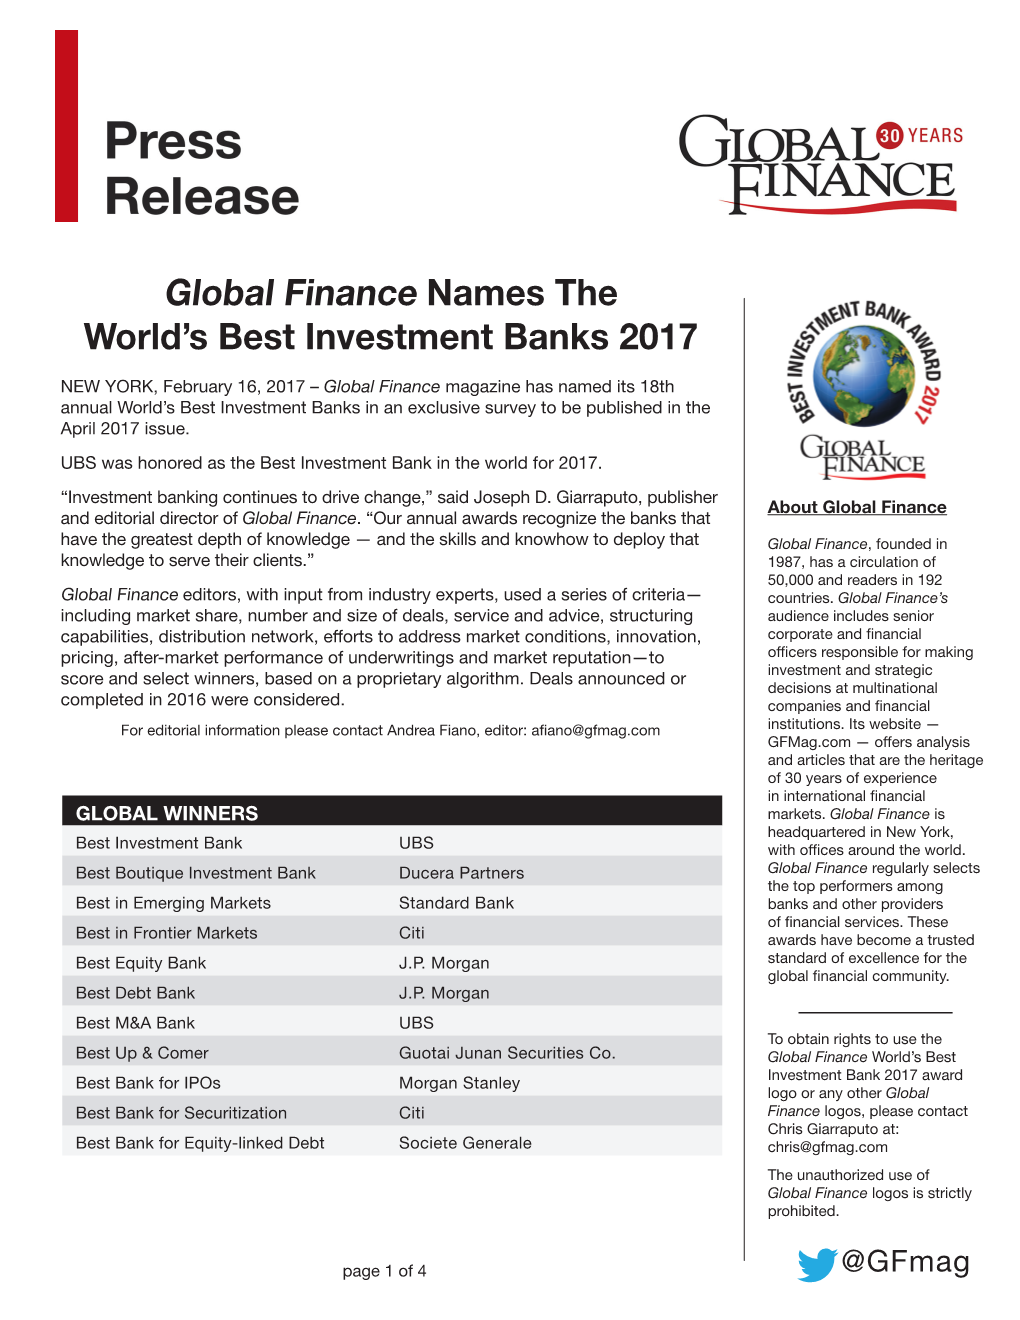 Global Finance Names the World's Best Investment Banks 2017